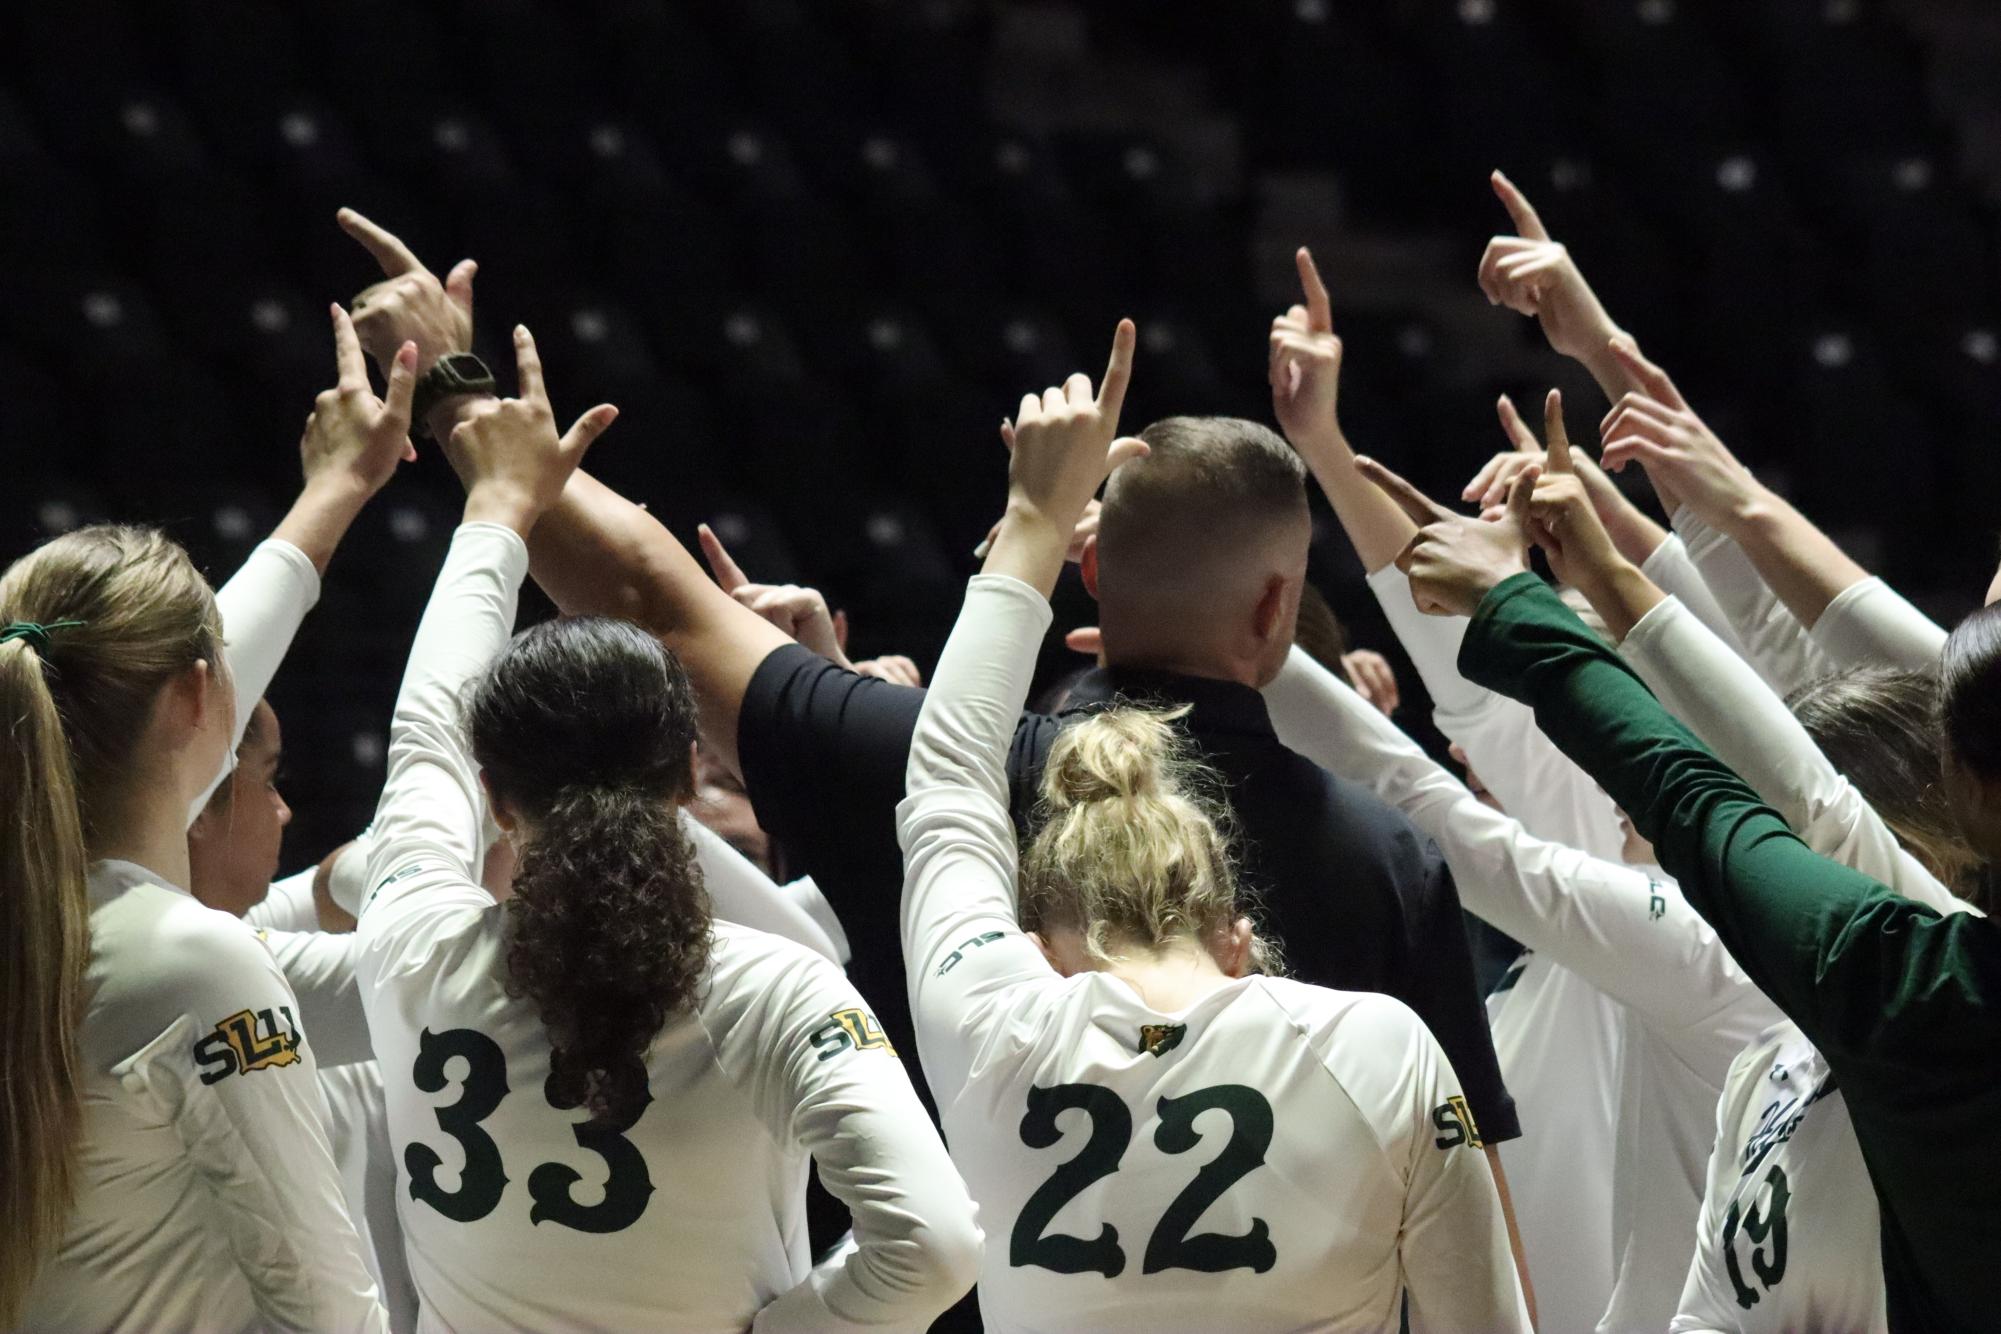 SLU players give the Lion Up sign in their team huddle during a game against Washington at the Pride Roofing University Center. (Aug. 25, 2023 - Hammond)